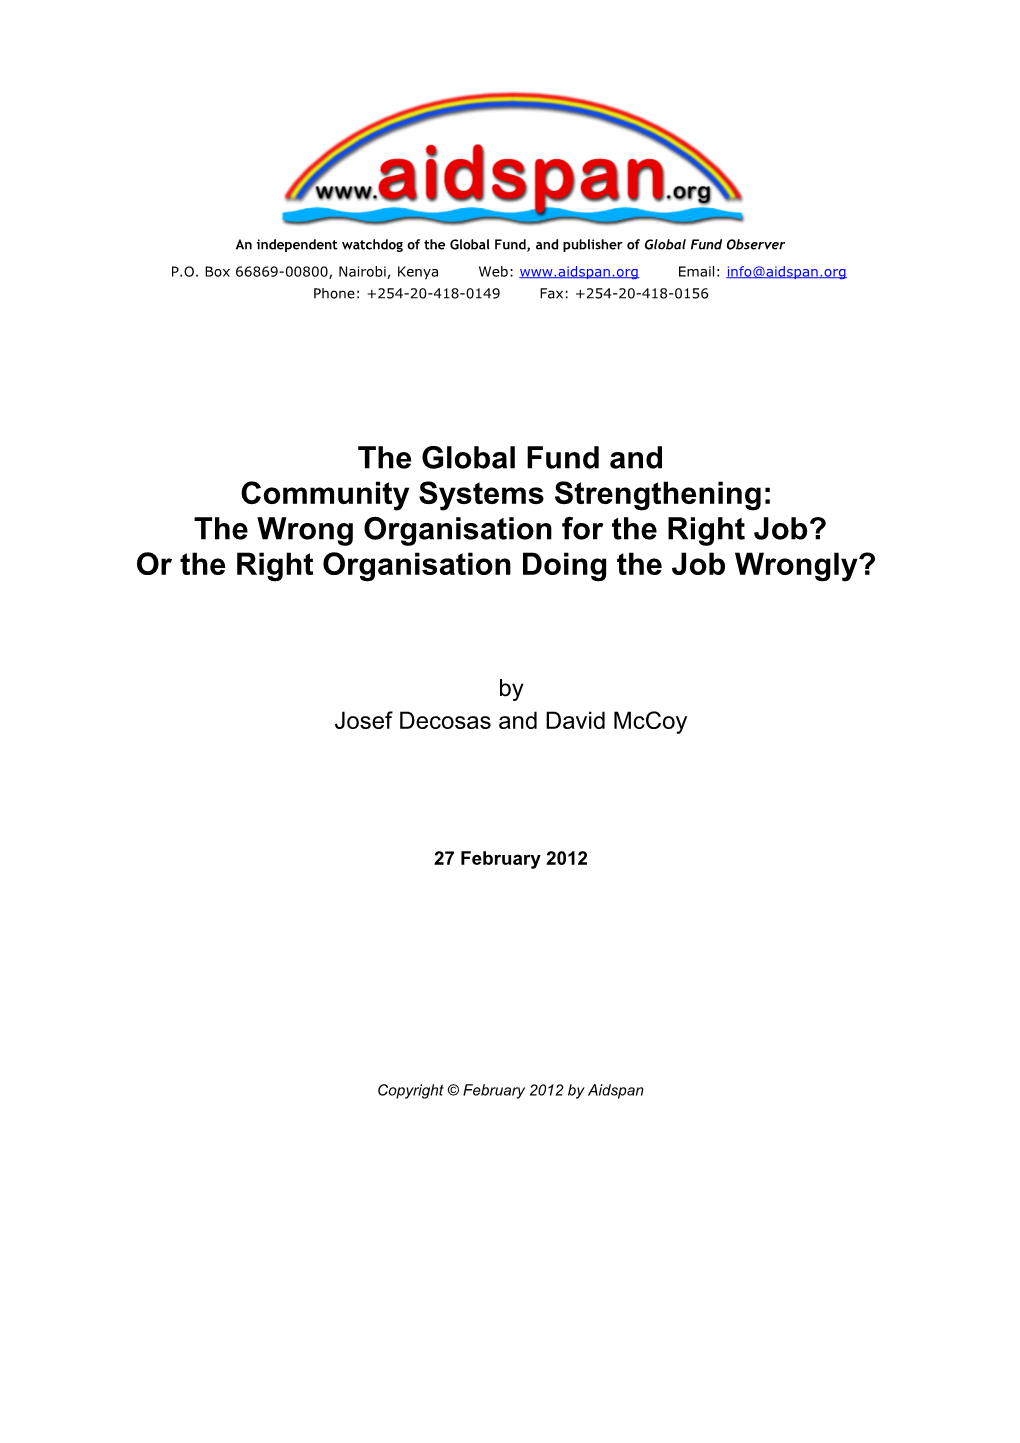 The Global Fund and Community Systems Strengthening